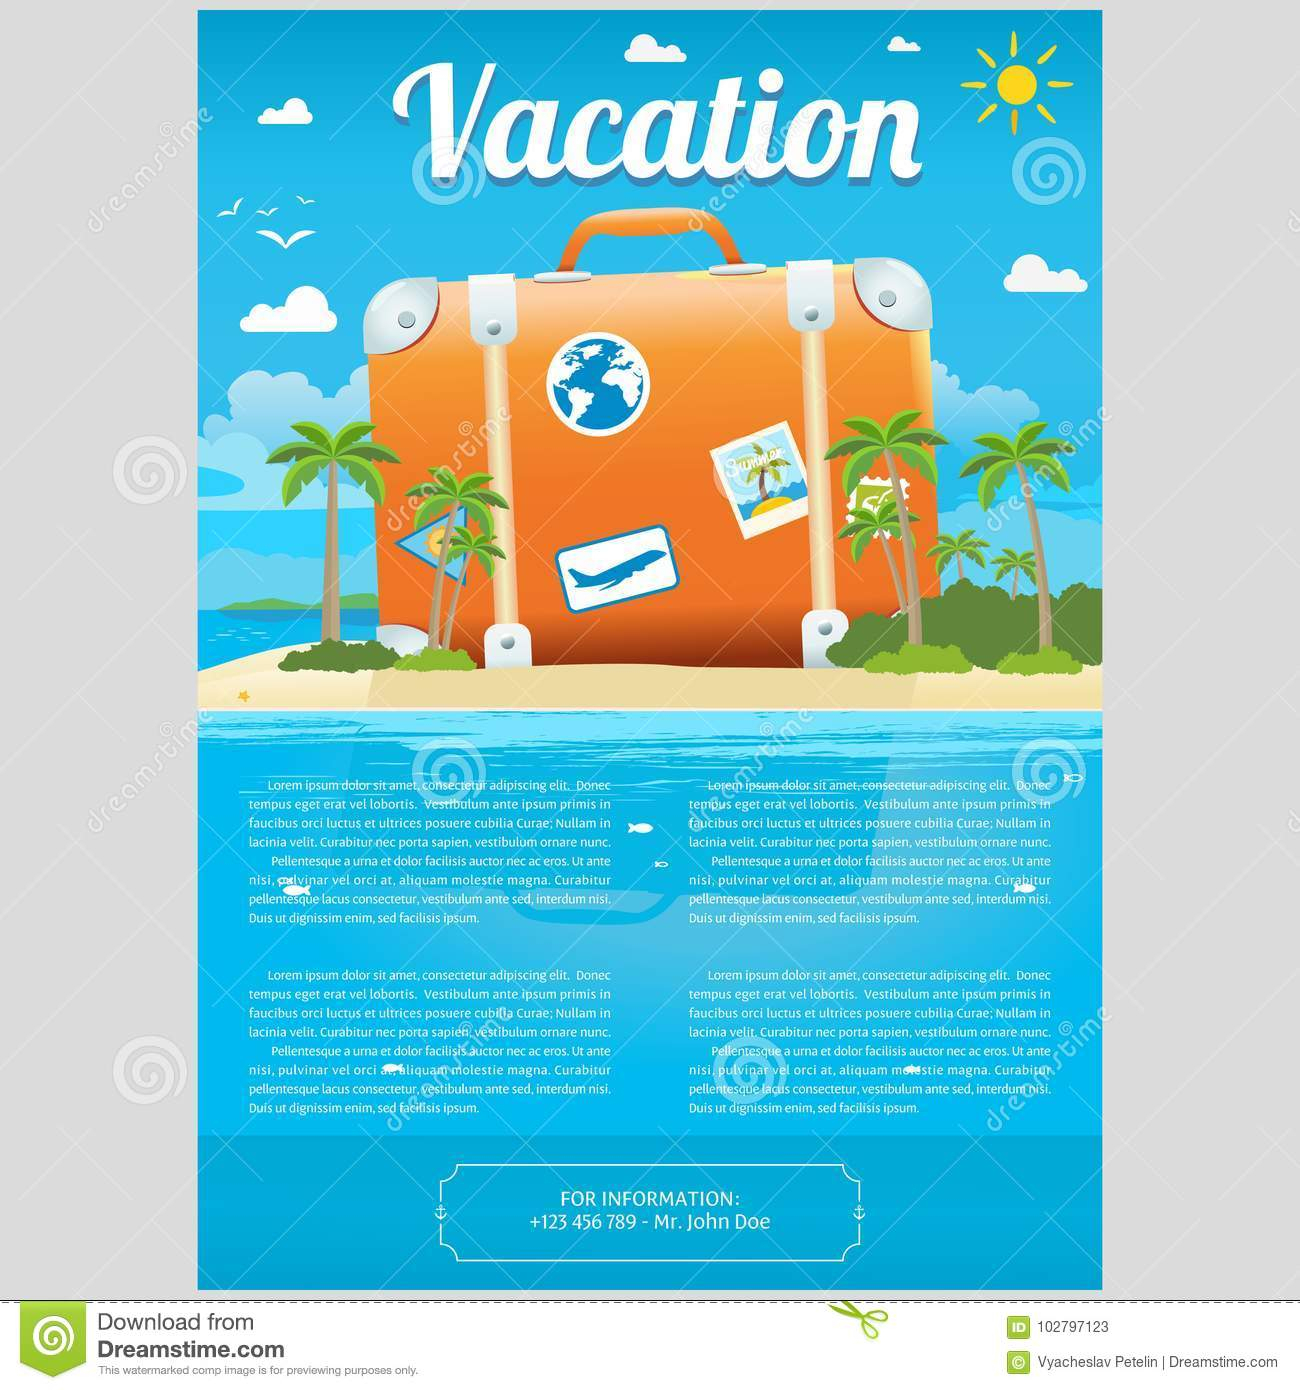 Vector Illustration Of Travel Suitcase On The Sea Island With Regard To Island Brochure Template